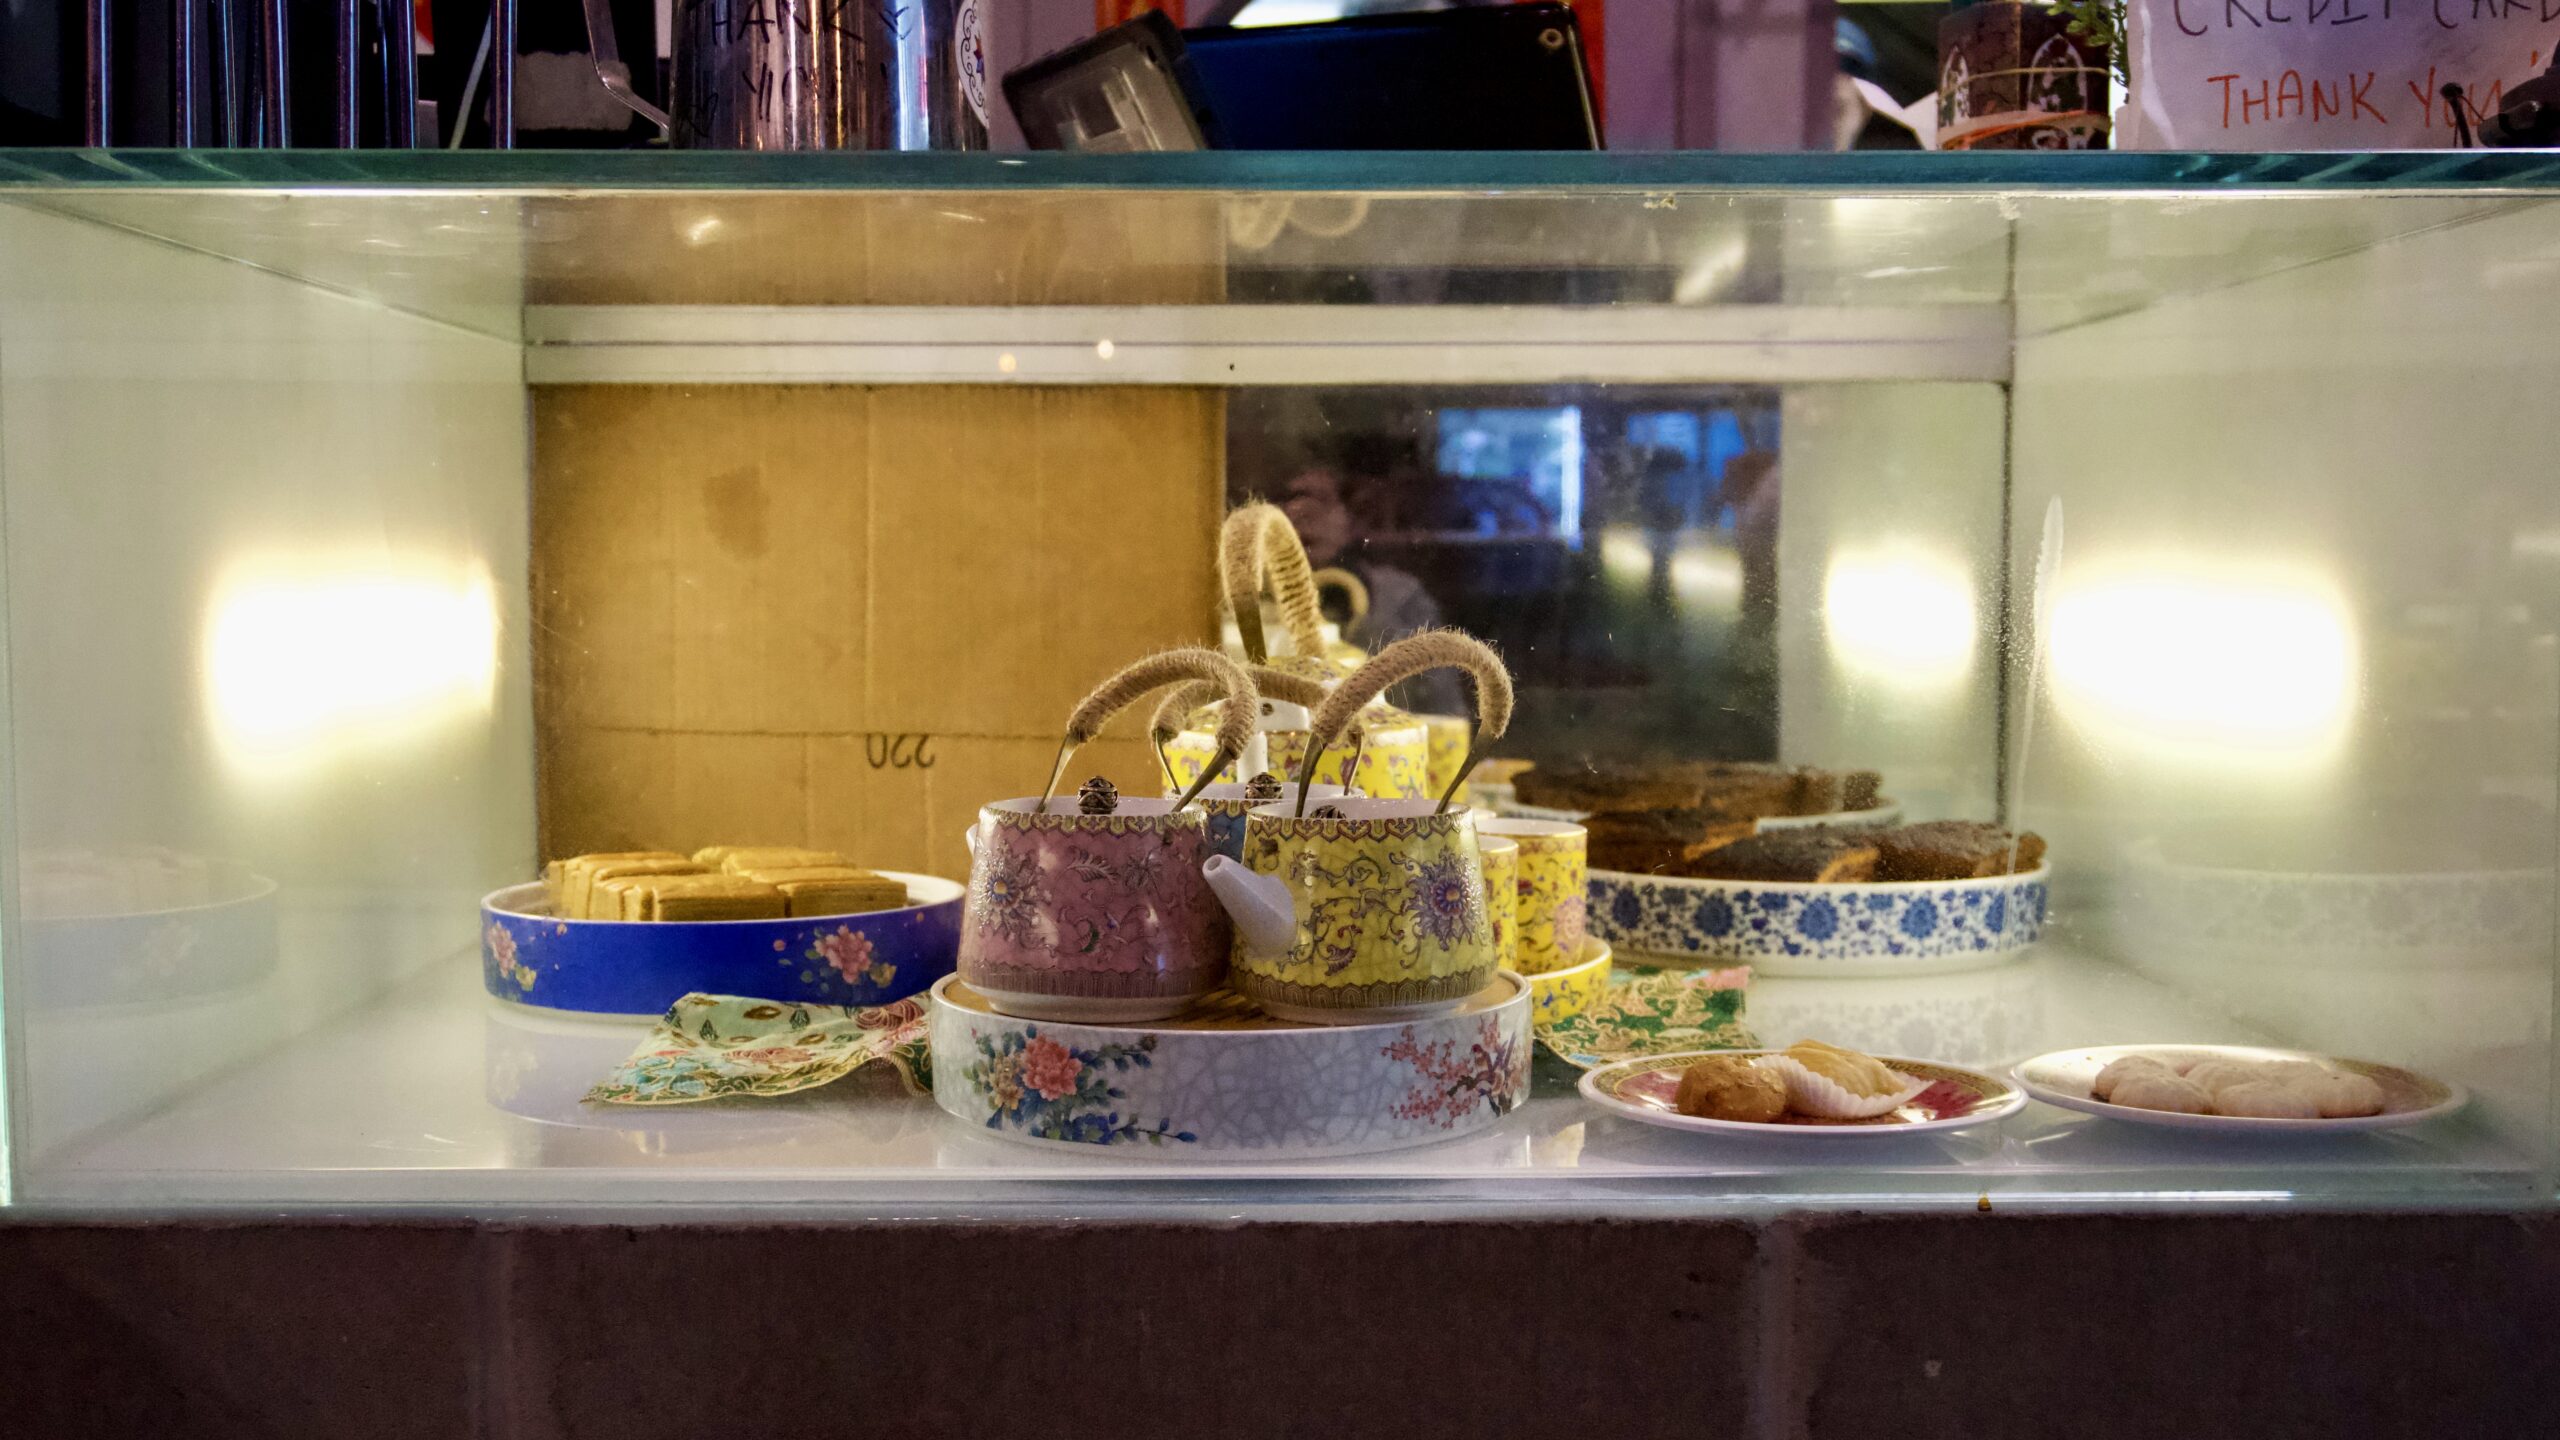 Colorful teapots and cakes in patterned dishes sit in a display case.